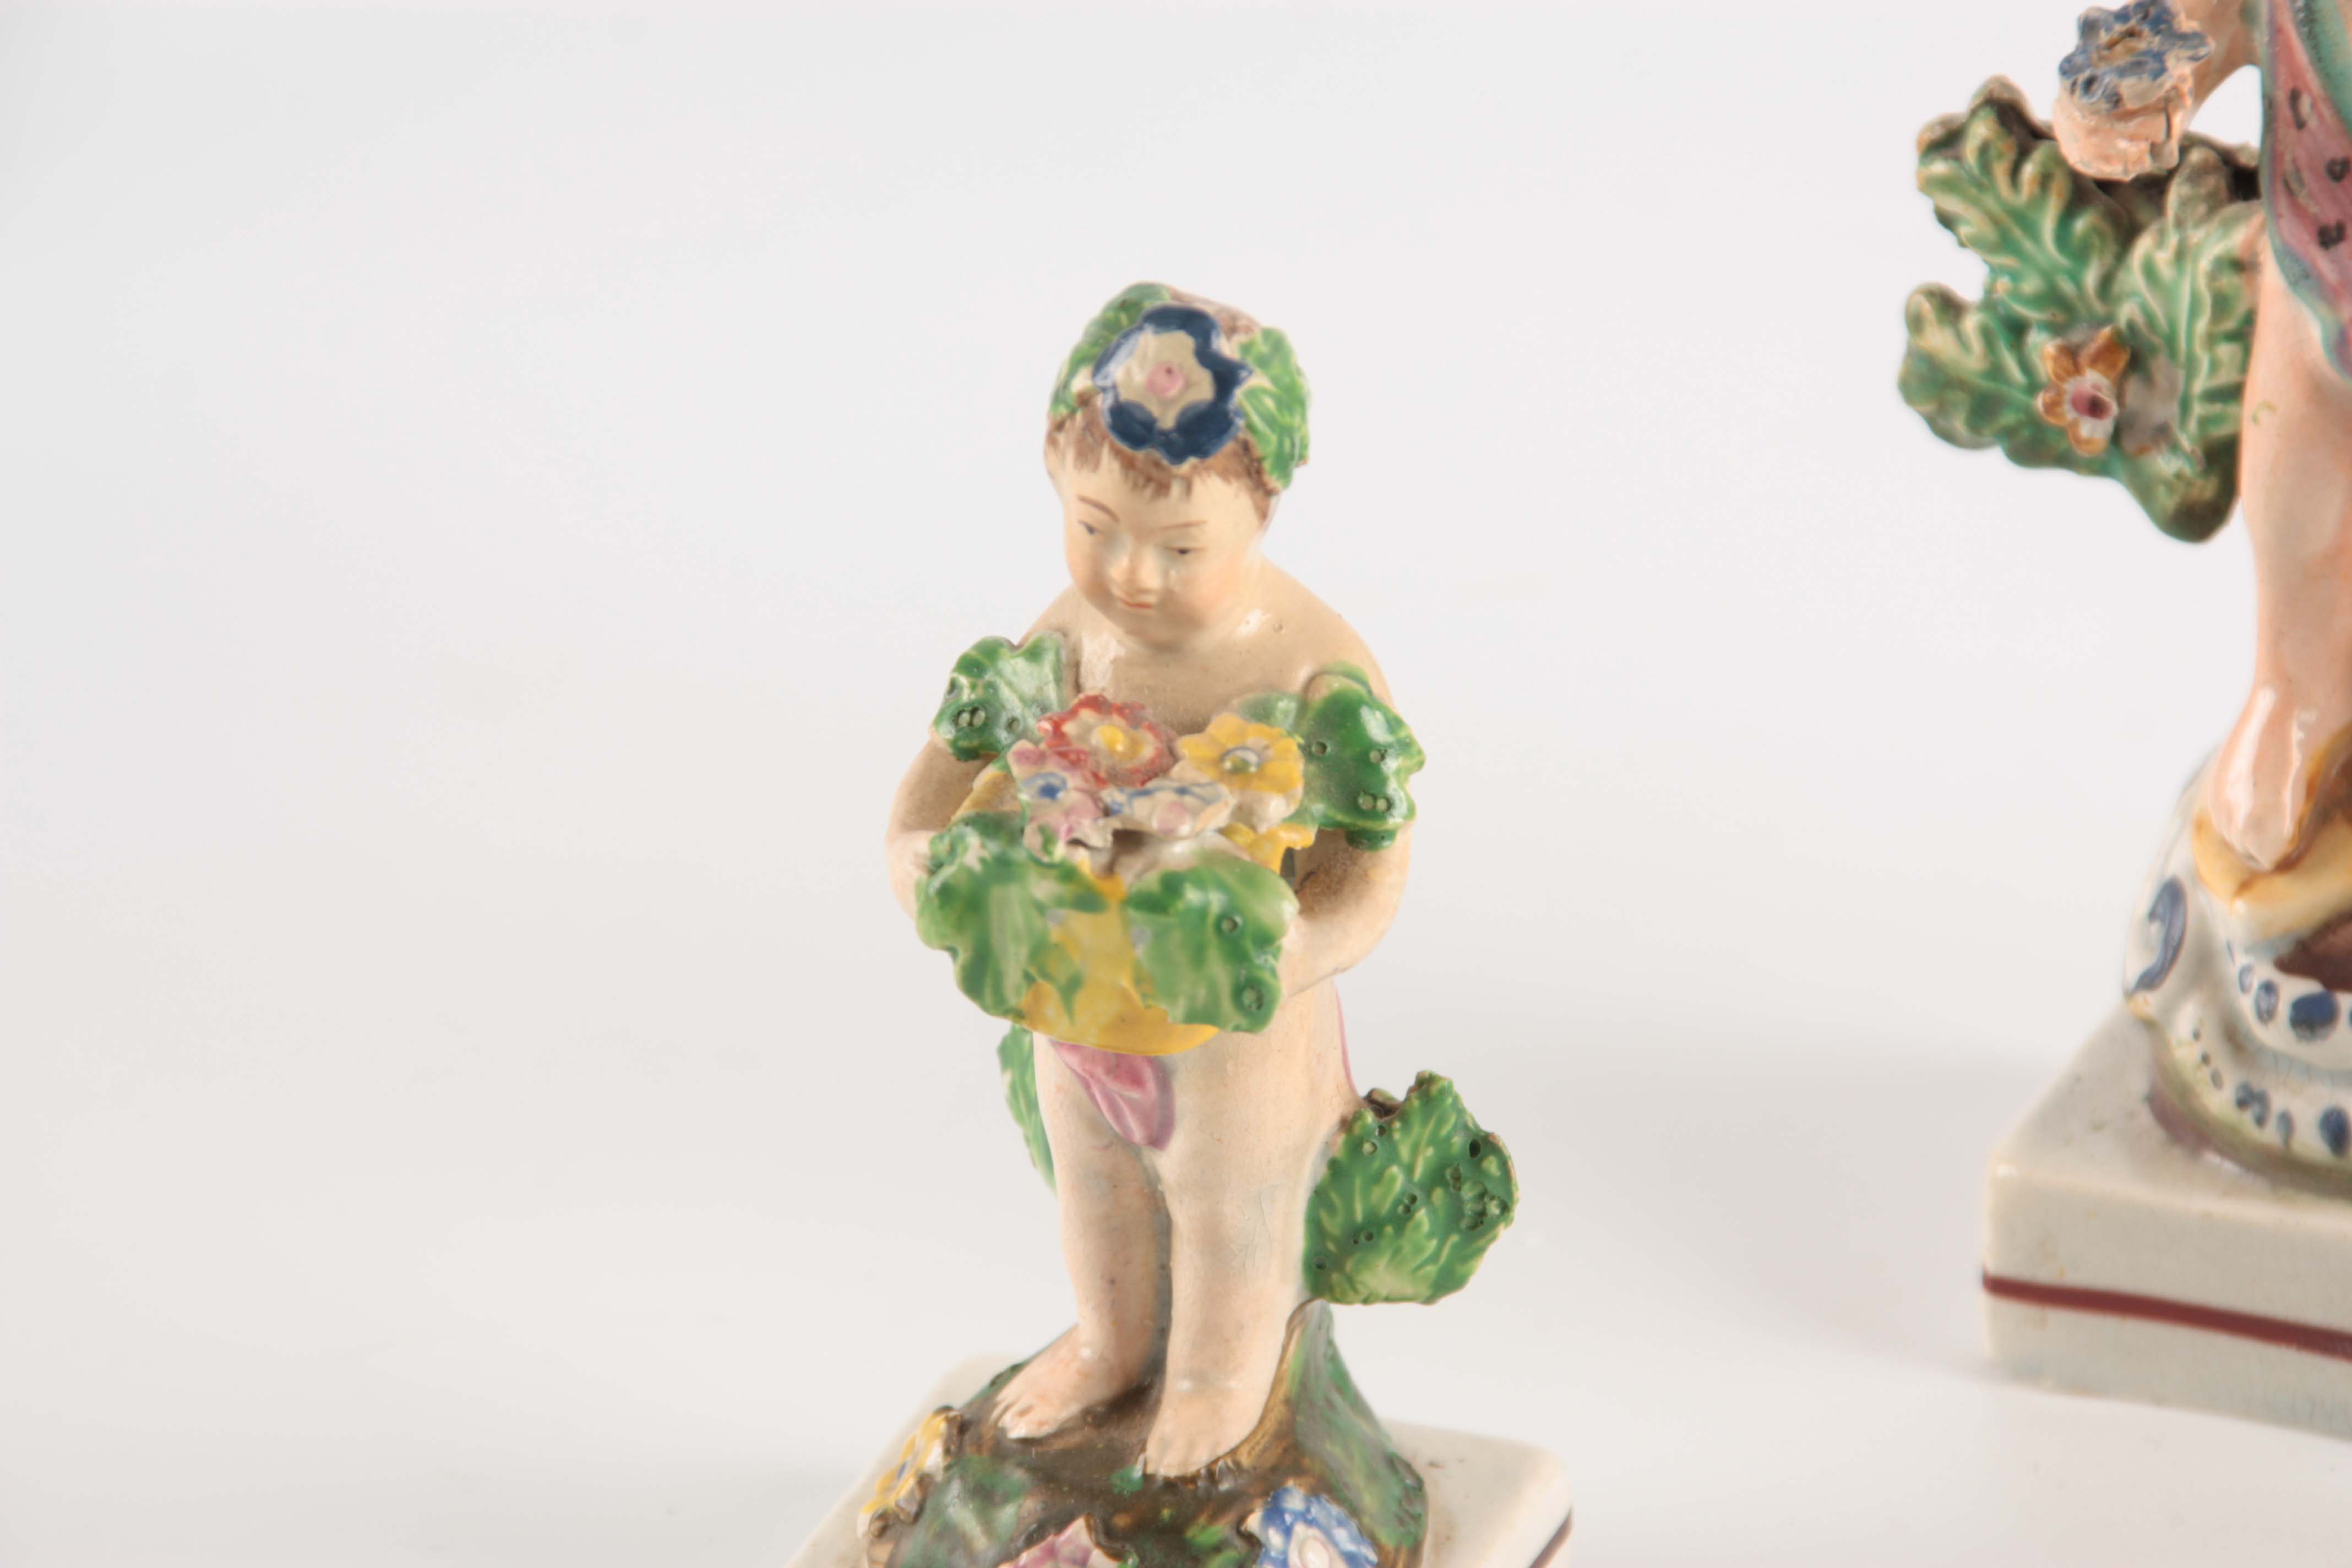 A SELECTION OF FOUR EARLY 19TH CENTURY STAFFORDSHIRE PEARLWARE FIGURES of cherubs holding various - Image 3 of 5